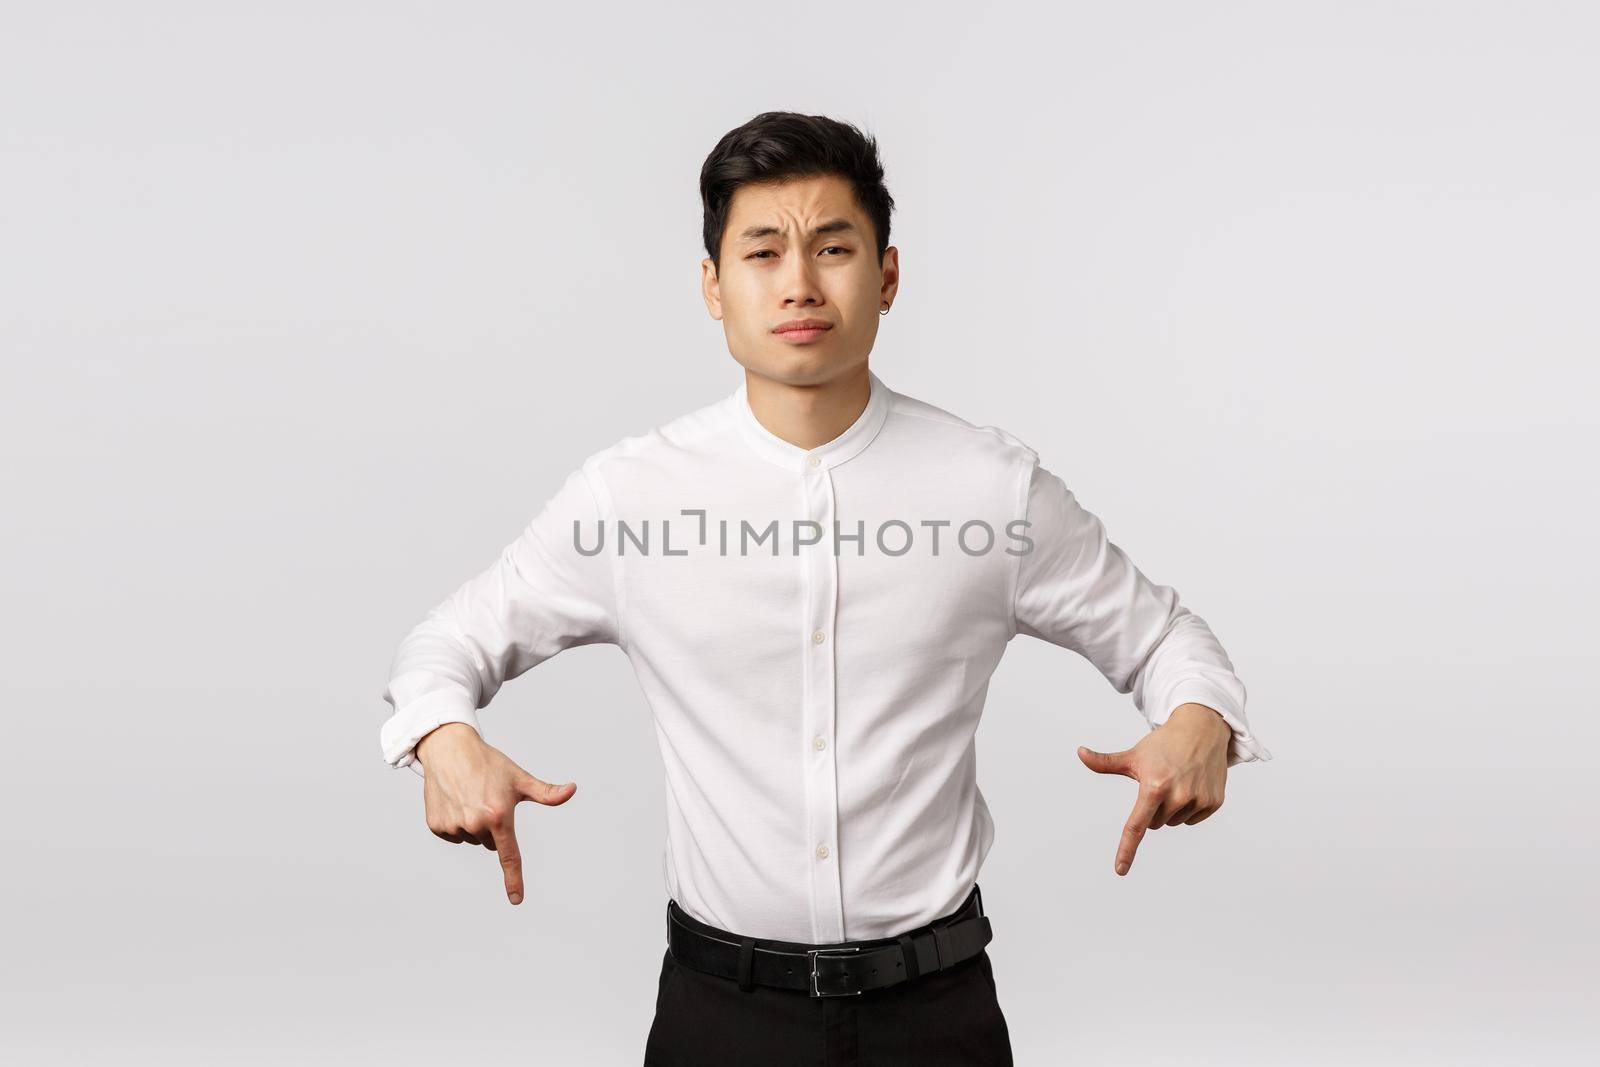 Skeptical arrogant asian businessman in white shirt, pants, pointing down look camera unsatisfied and unimpressed, sulking, grimacing careless, express dislike or scorn, white background.